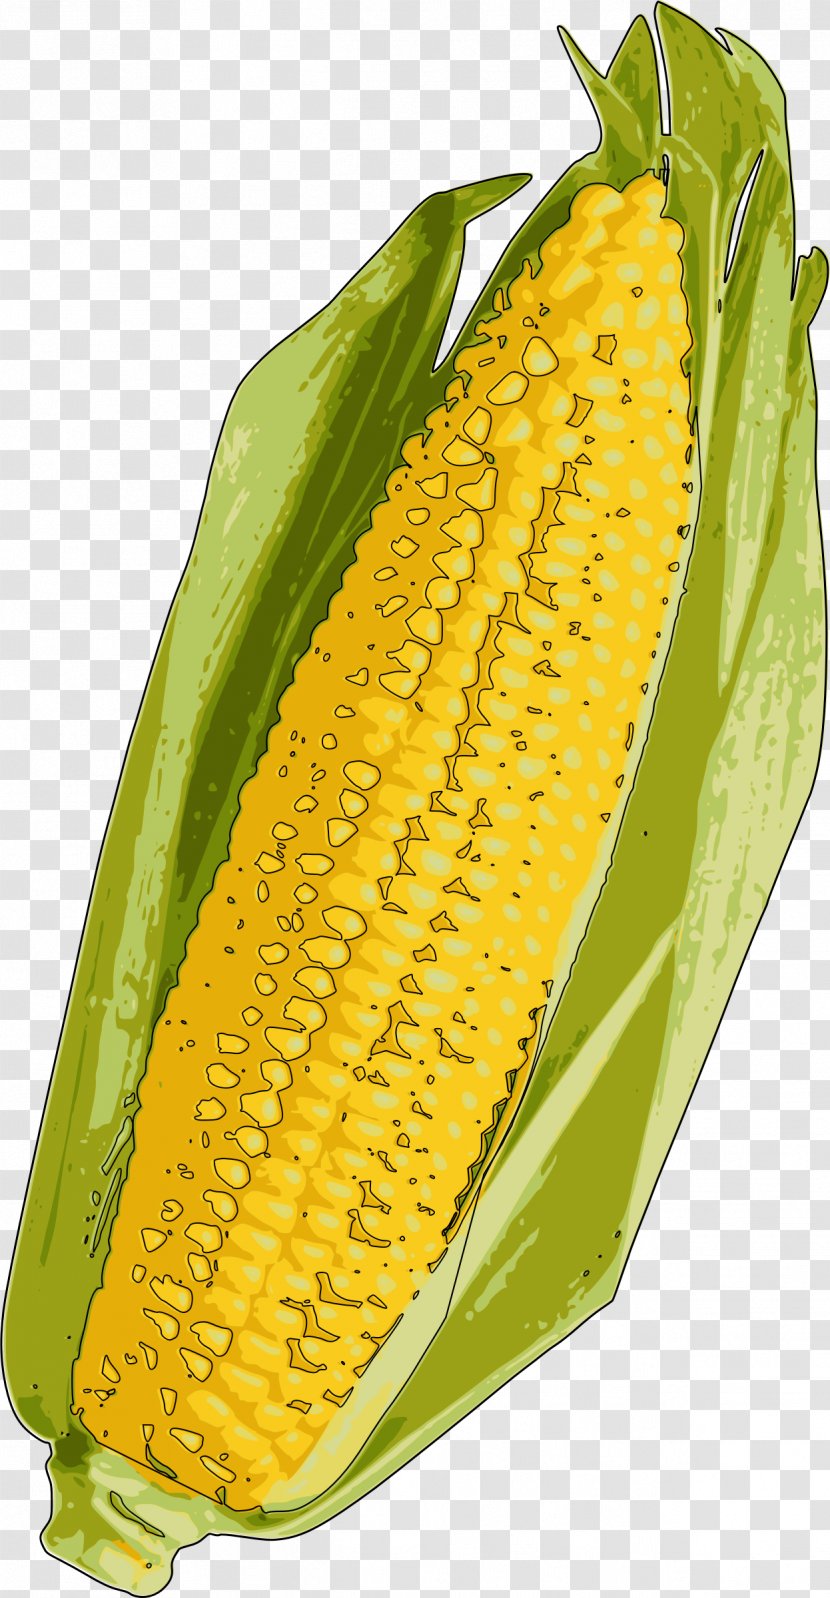 Corn On The Cob Popcorn Candy Flakes Maize Transparent PNG